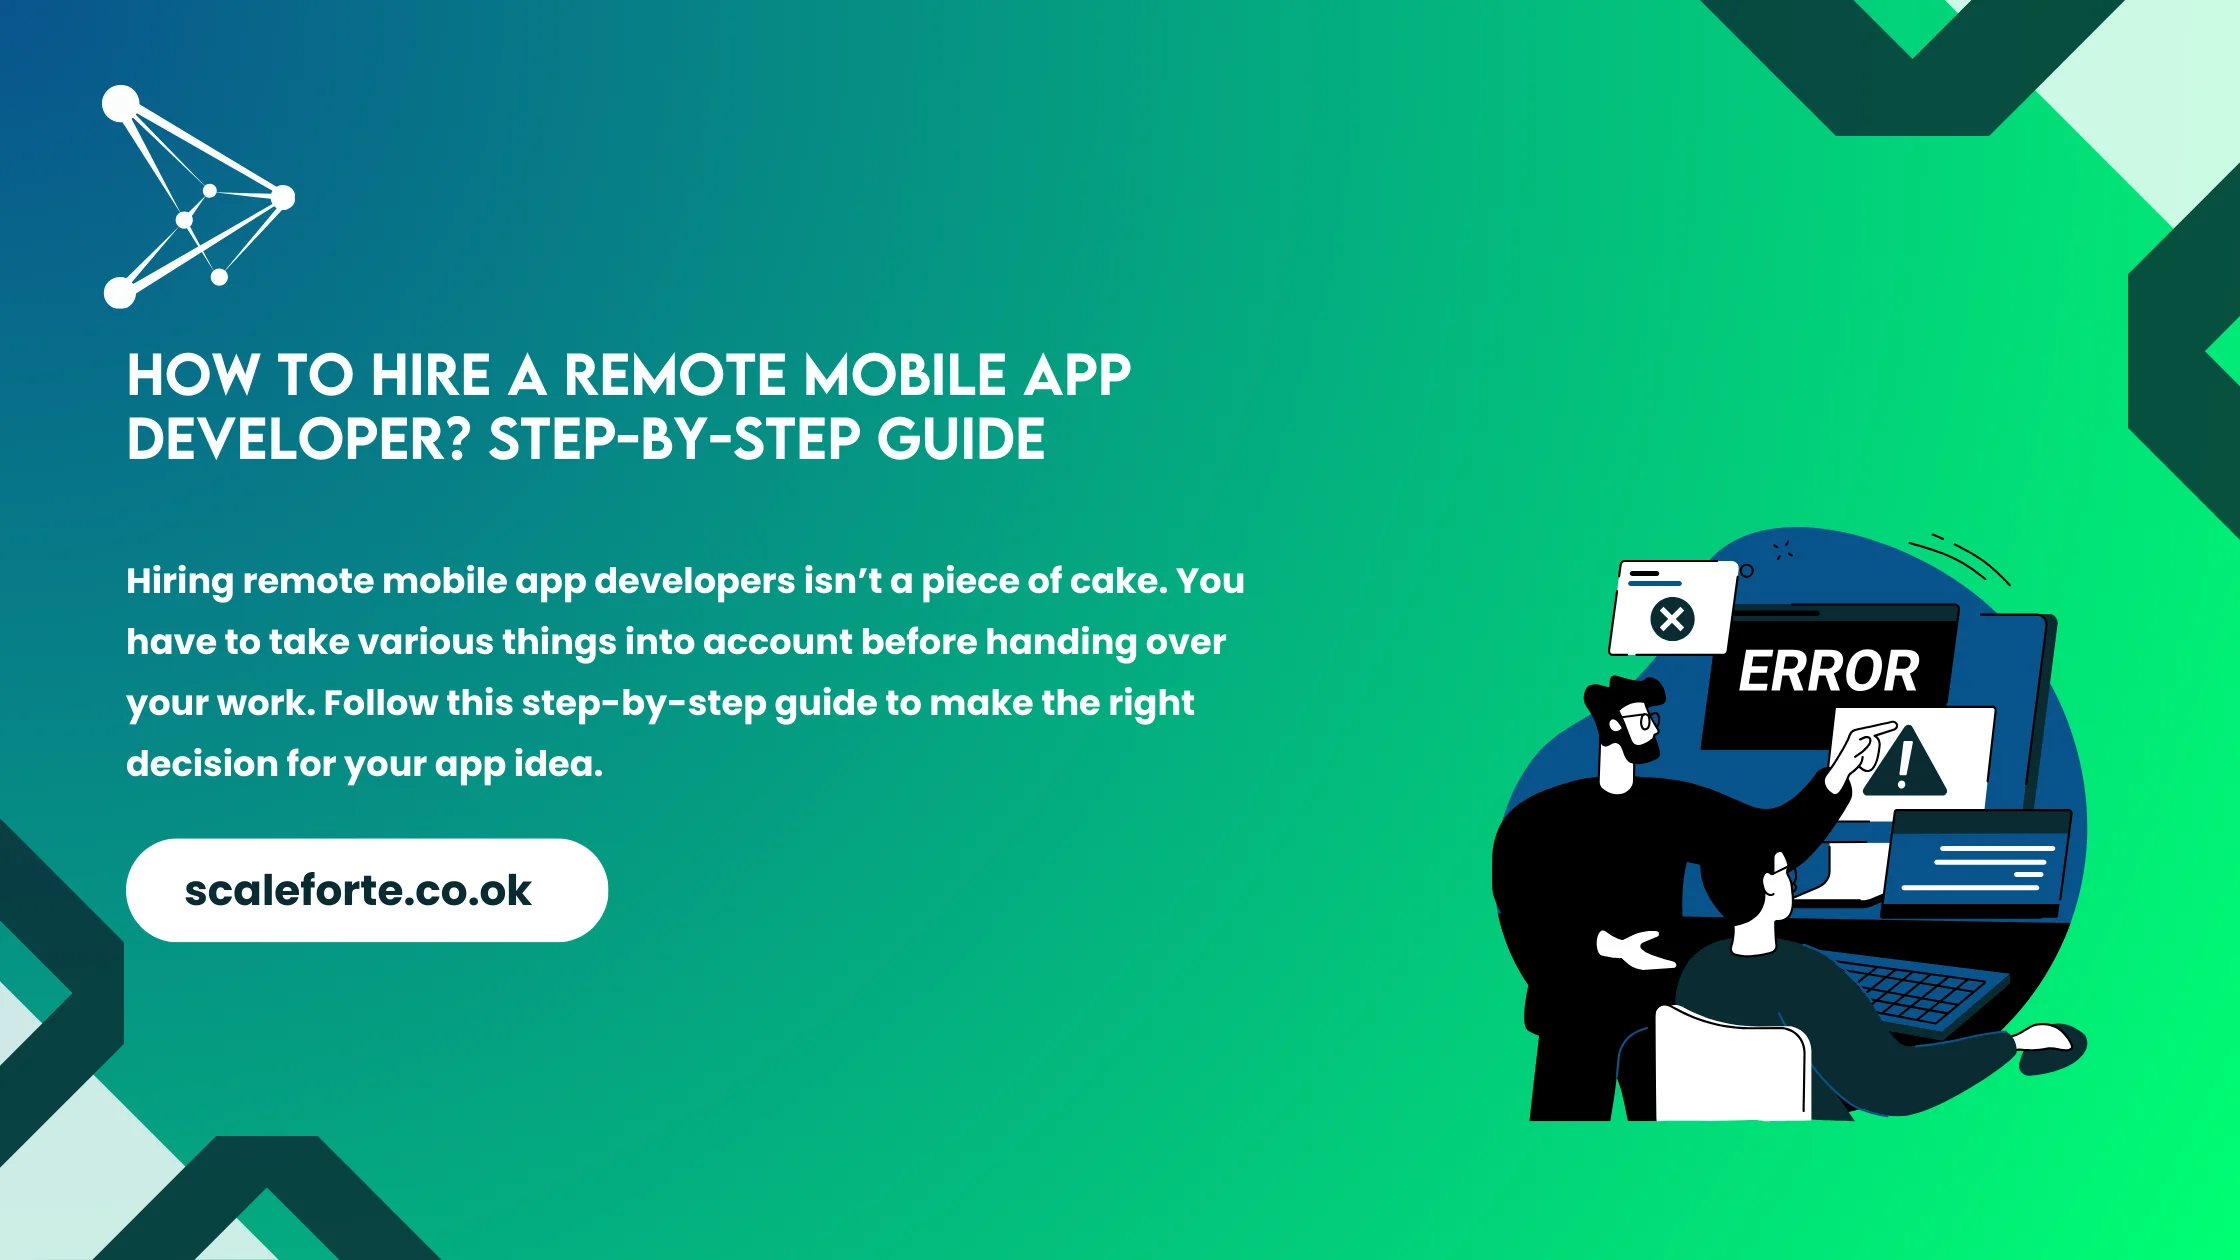 How to hire a remote mobile app developer Step-by-Step Guide